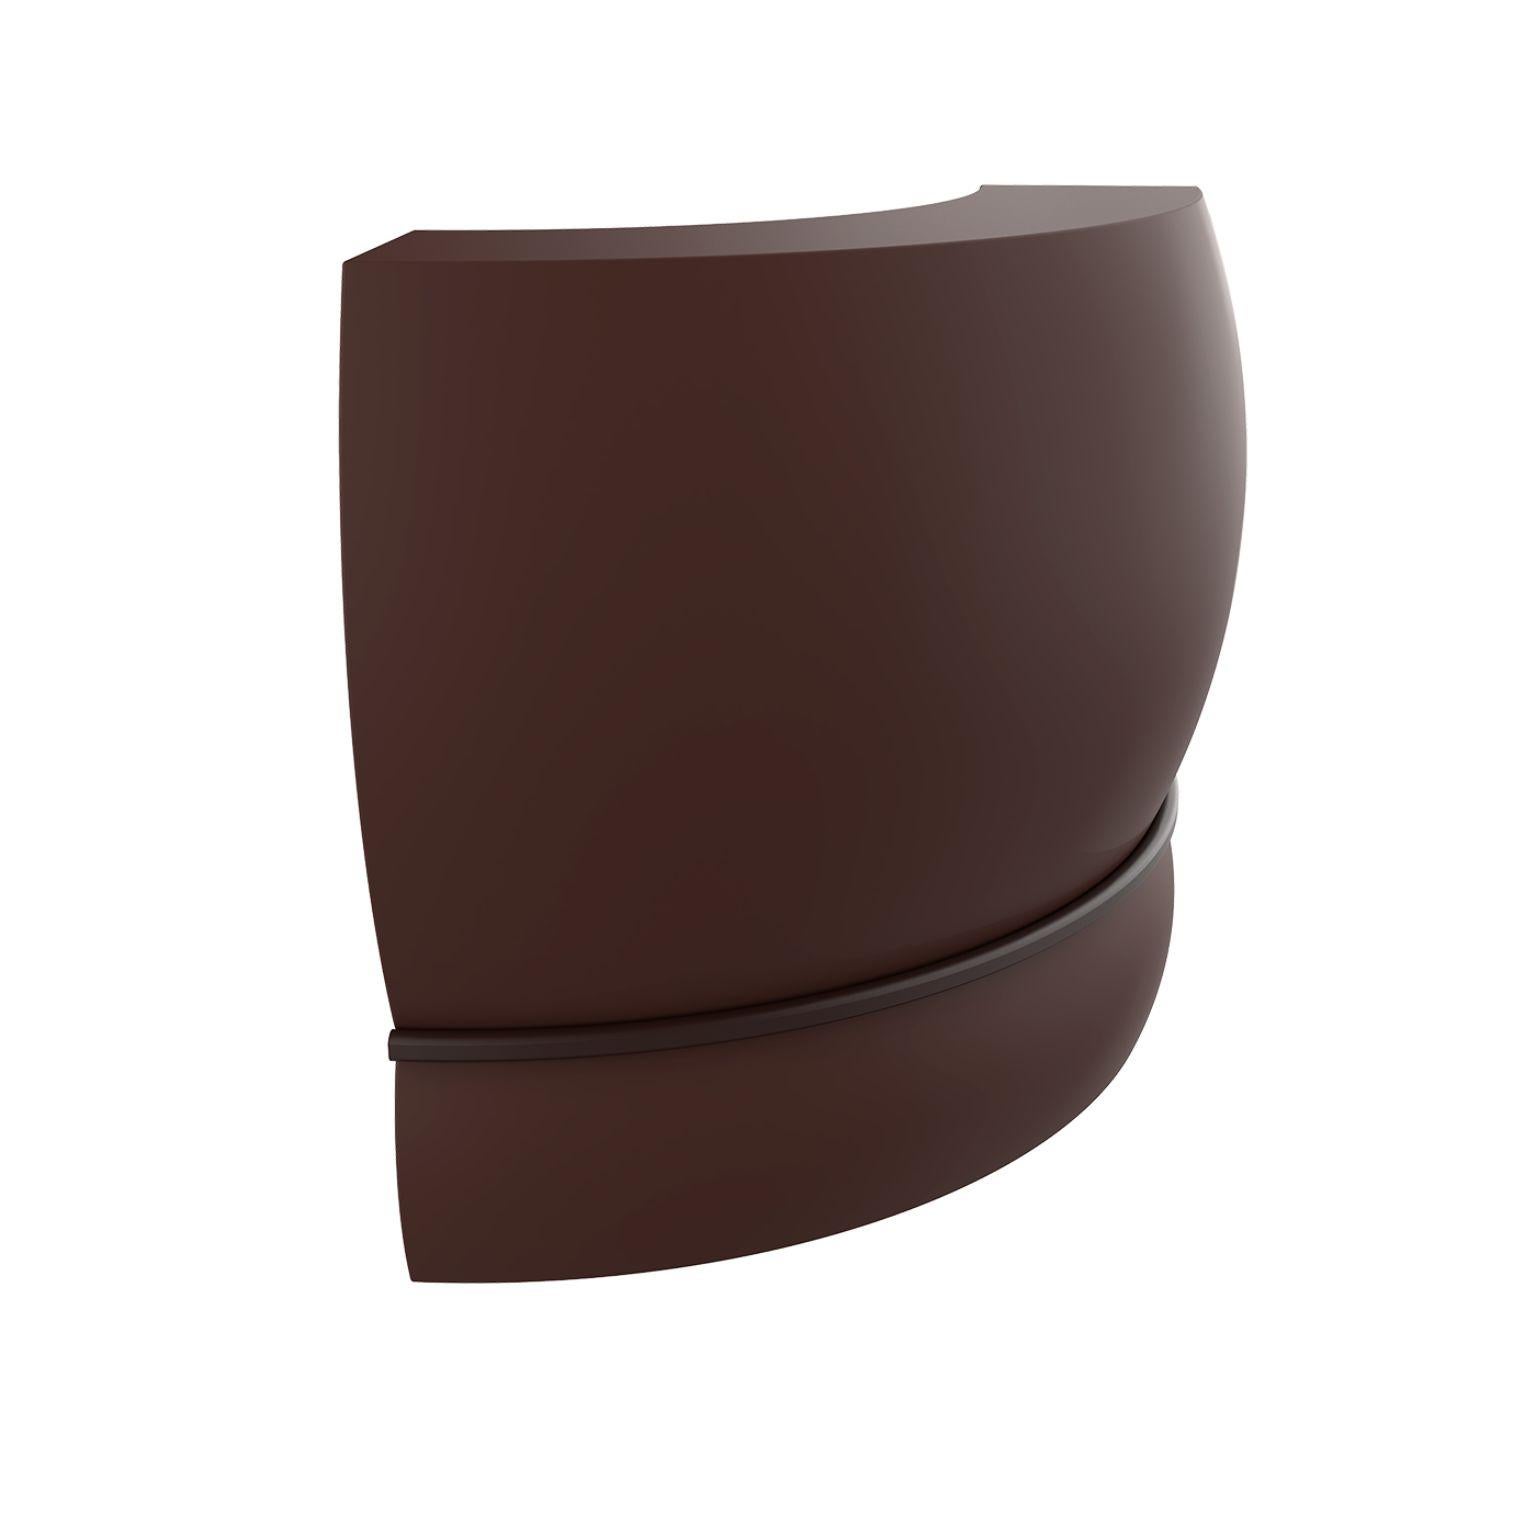 Chocolate curved Lace bar by Mowee
Dimensions: D 100 x W 100 x H 115 cm.
Material: Polyethylene and stainless steel.
Weight: 31 kg.
Also available in different colors and finishes (lacquered, retroilluminated). Optional wheel kit and optional